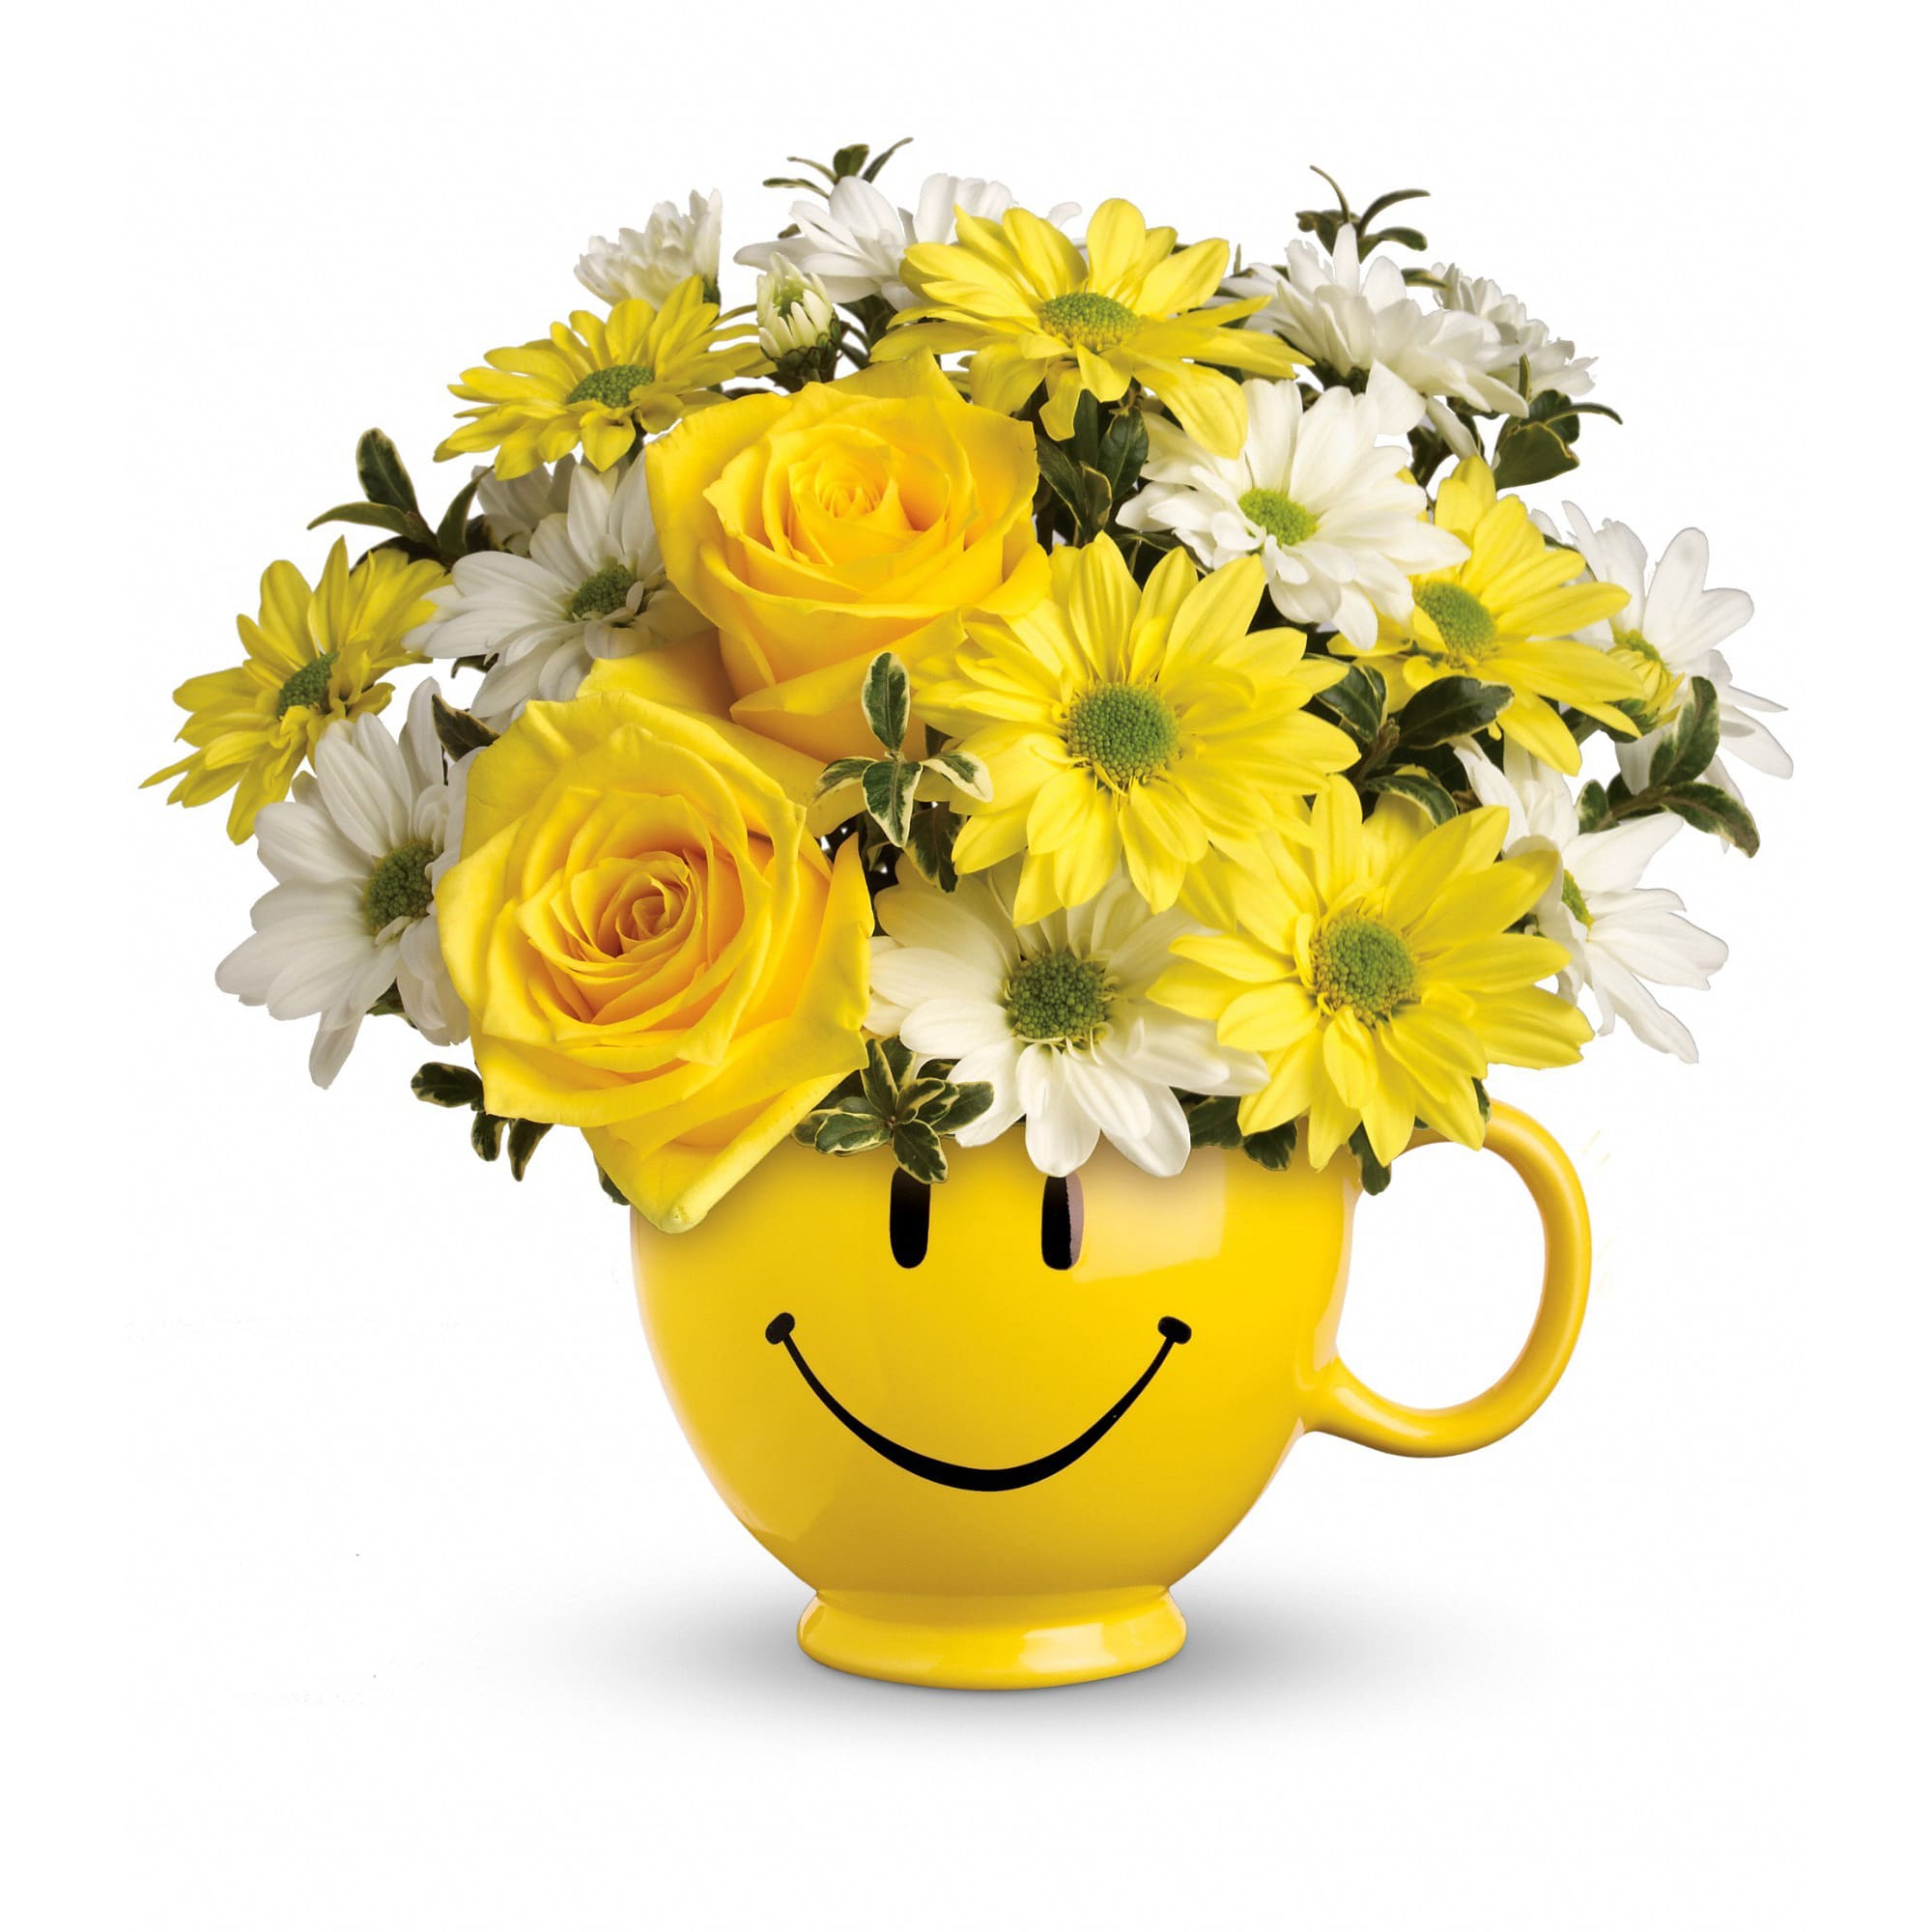 Be Happy Mug - Full of happy flowers, this ceramic happy face mug will bring smiles for years to come. Especially when filled with that first cup of morning coffee or cocoa! T43-1A